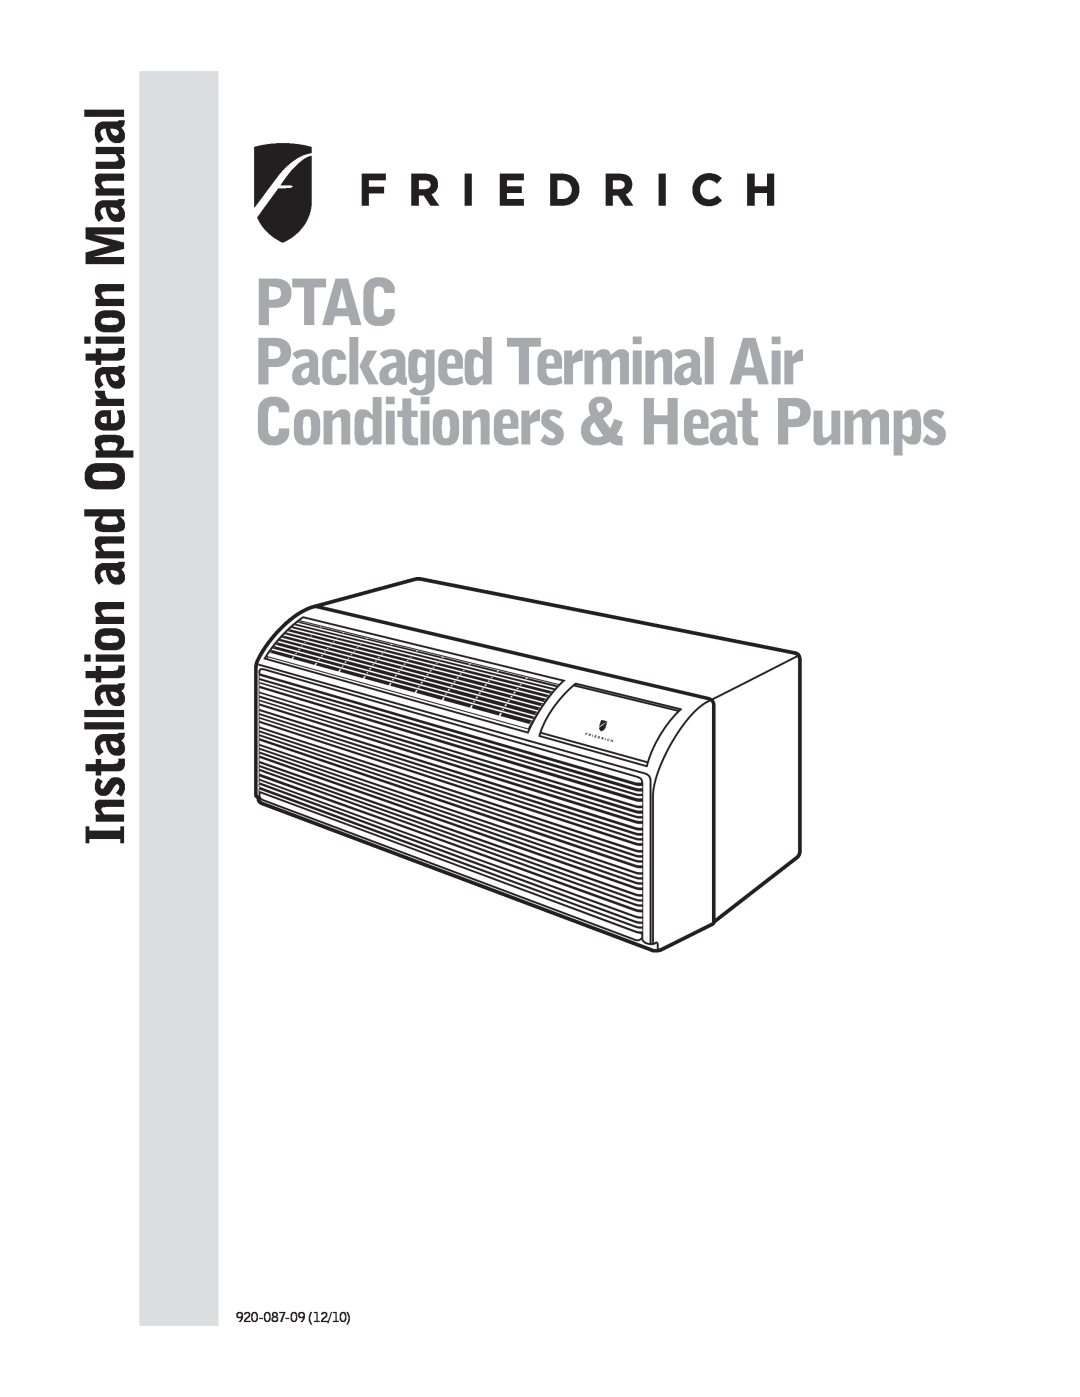 Friedrich 920-087-09 (12/10) operation manual PTAC Packaged Terminal Air, Conditioners & Heat Pumps 